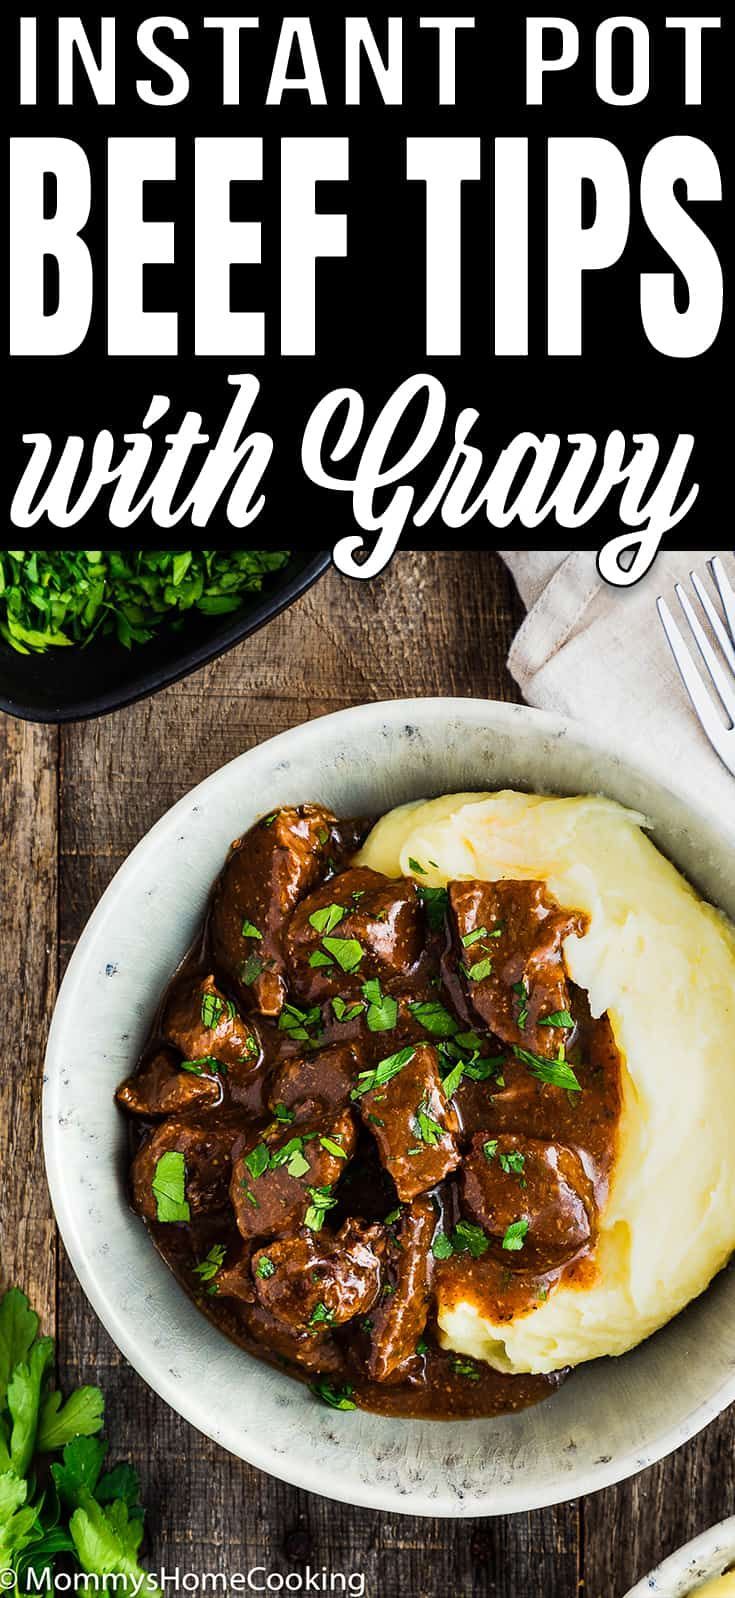 Instant Pot Beef Tips with Gravy -   19 healthy instant pot recipes beef tips ideas